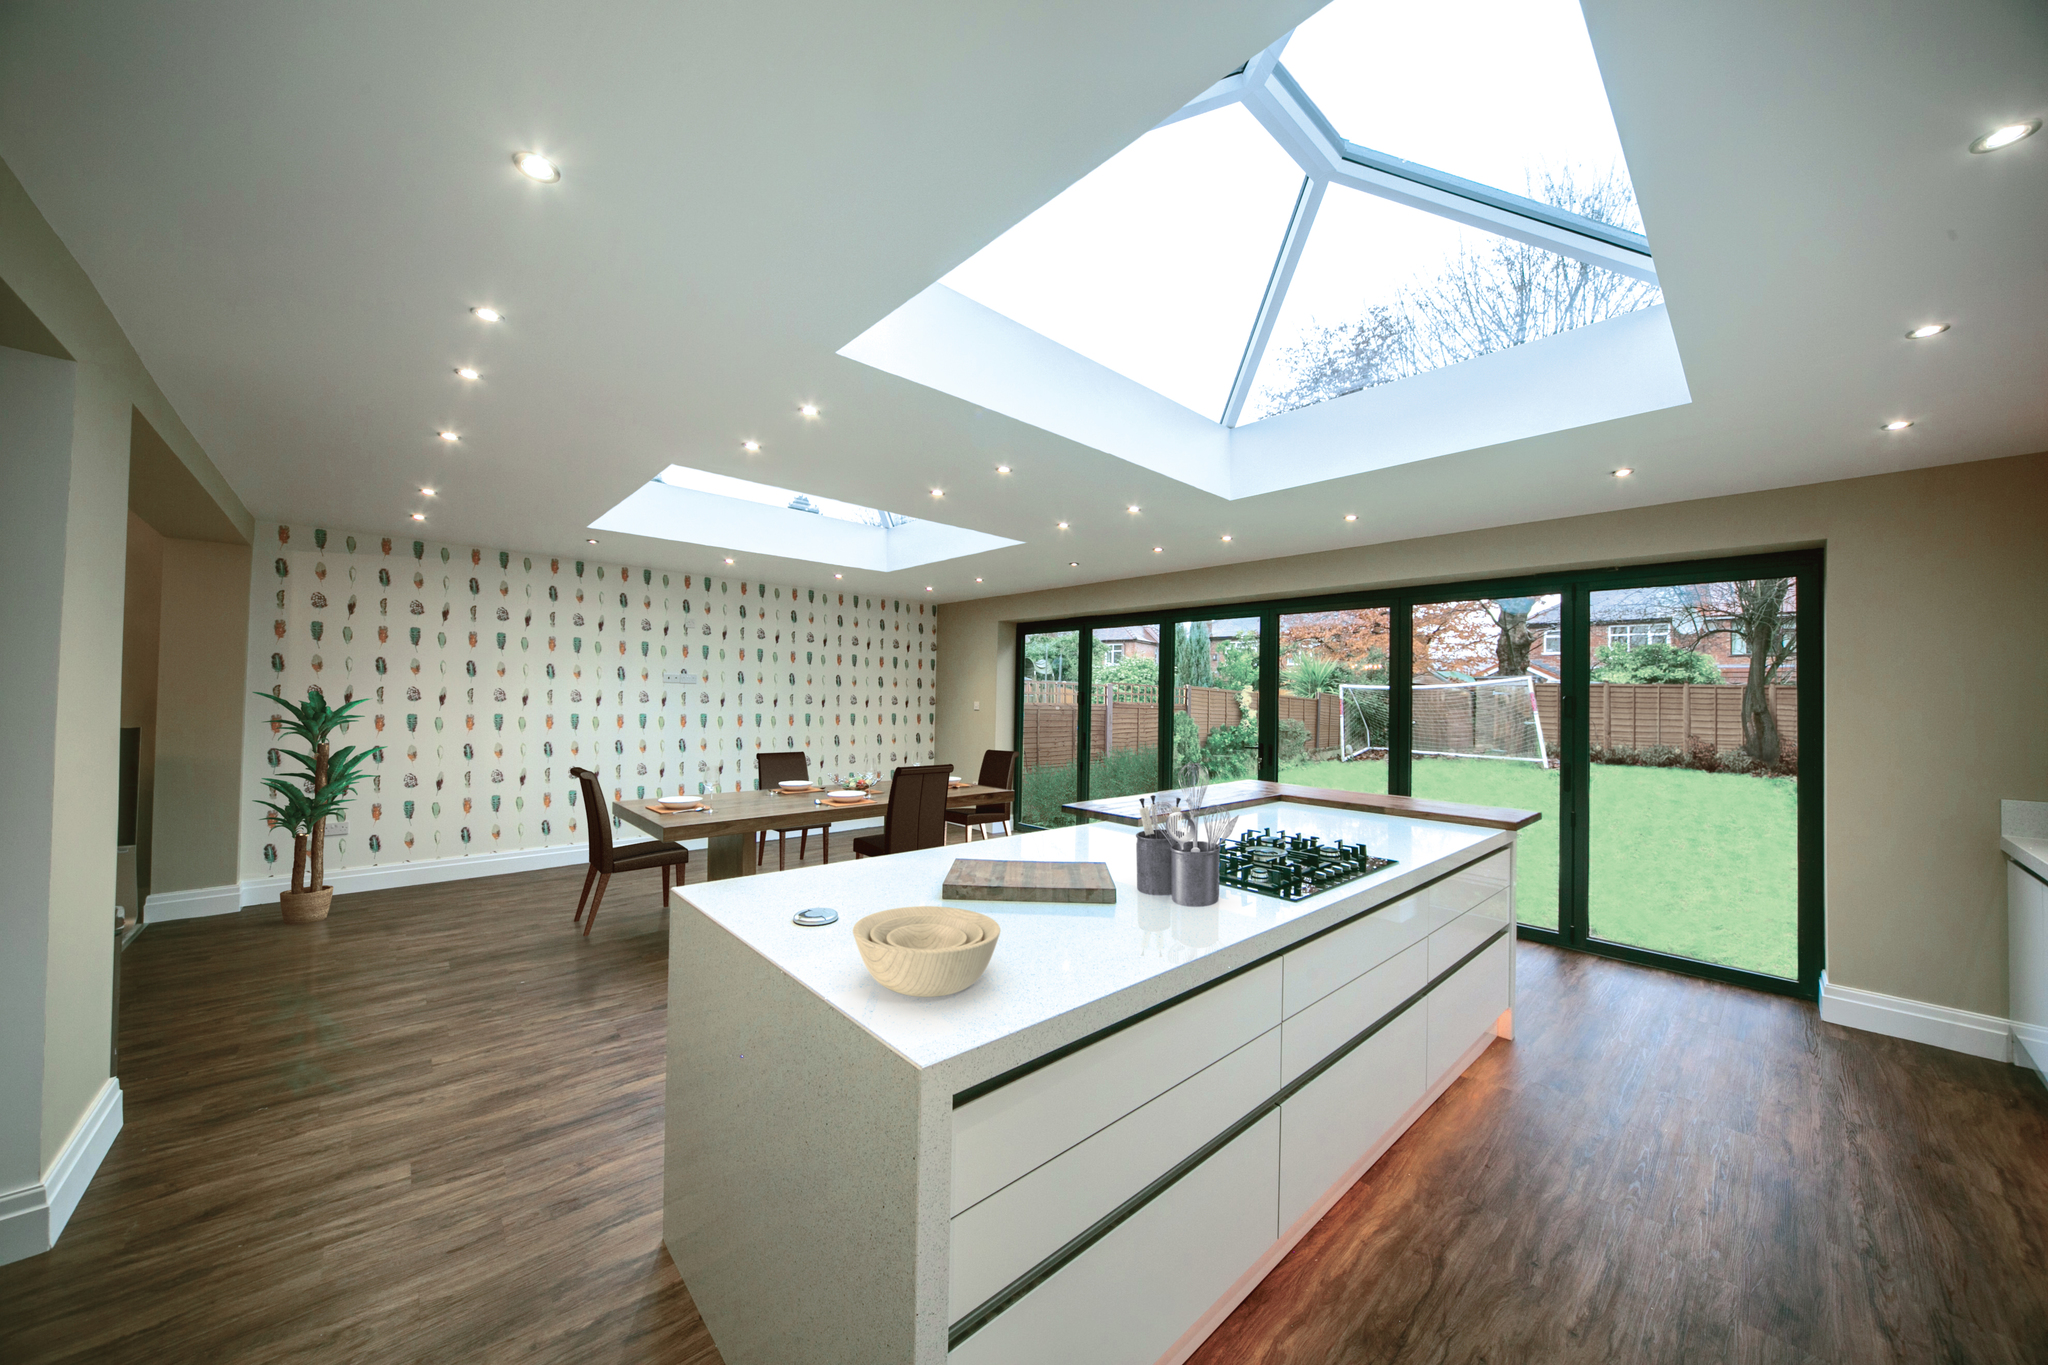 Sleek and spacious kitchen extension with contemporary design, showcasing a large central island, modern appliances, and an abundance of natural light from overhead skylights and wide glass doors leading to the garden